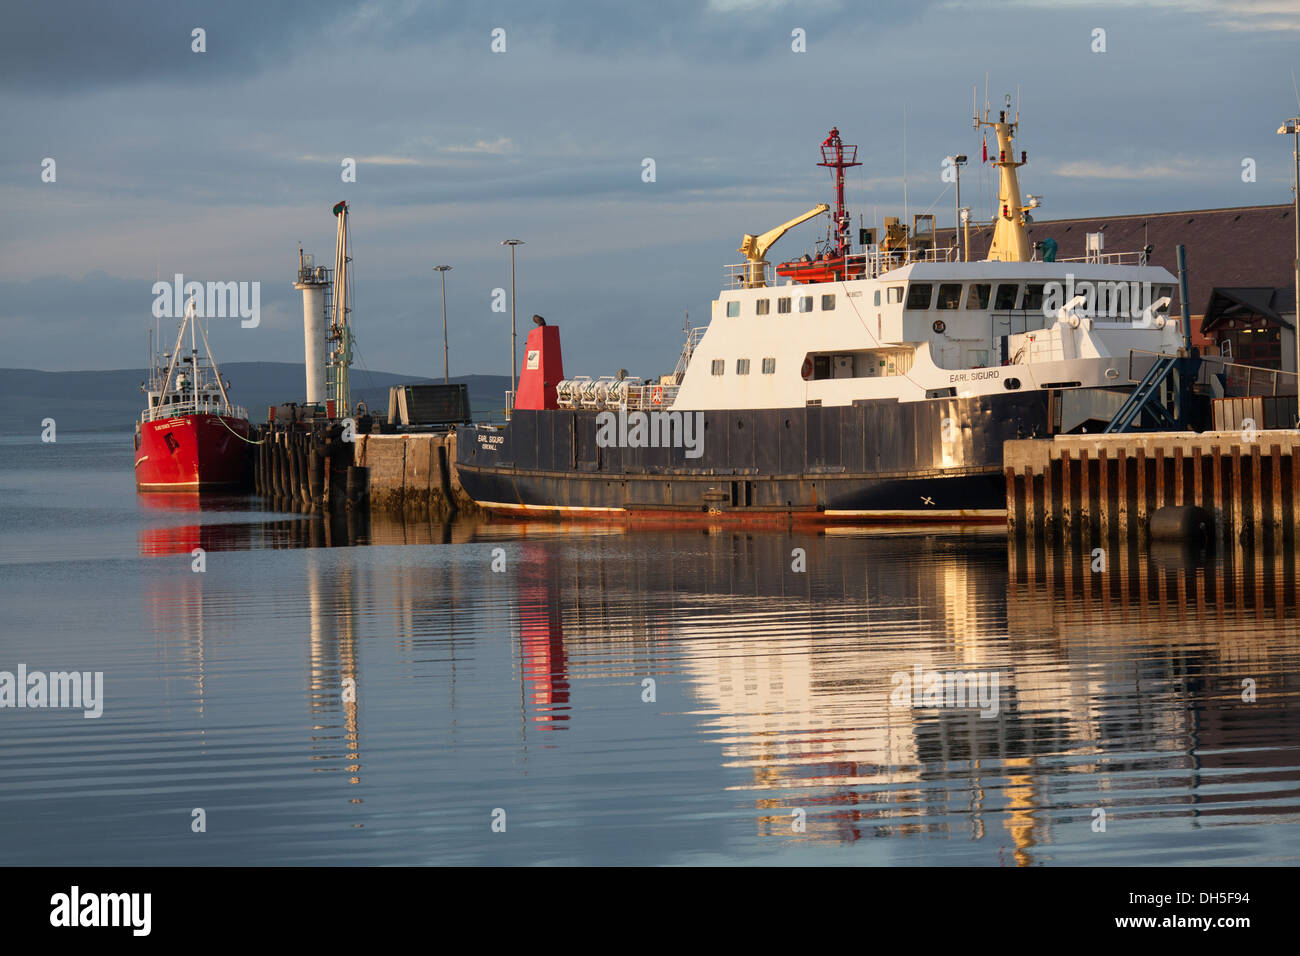 Islands of Orkney, Scotland. Picturesque early evening view of the ferry MV Earl Sigurd alongside Kirkwall’s harbour. Stock Photo